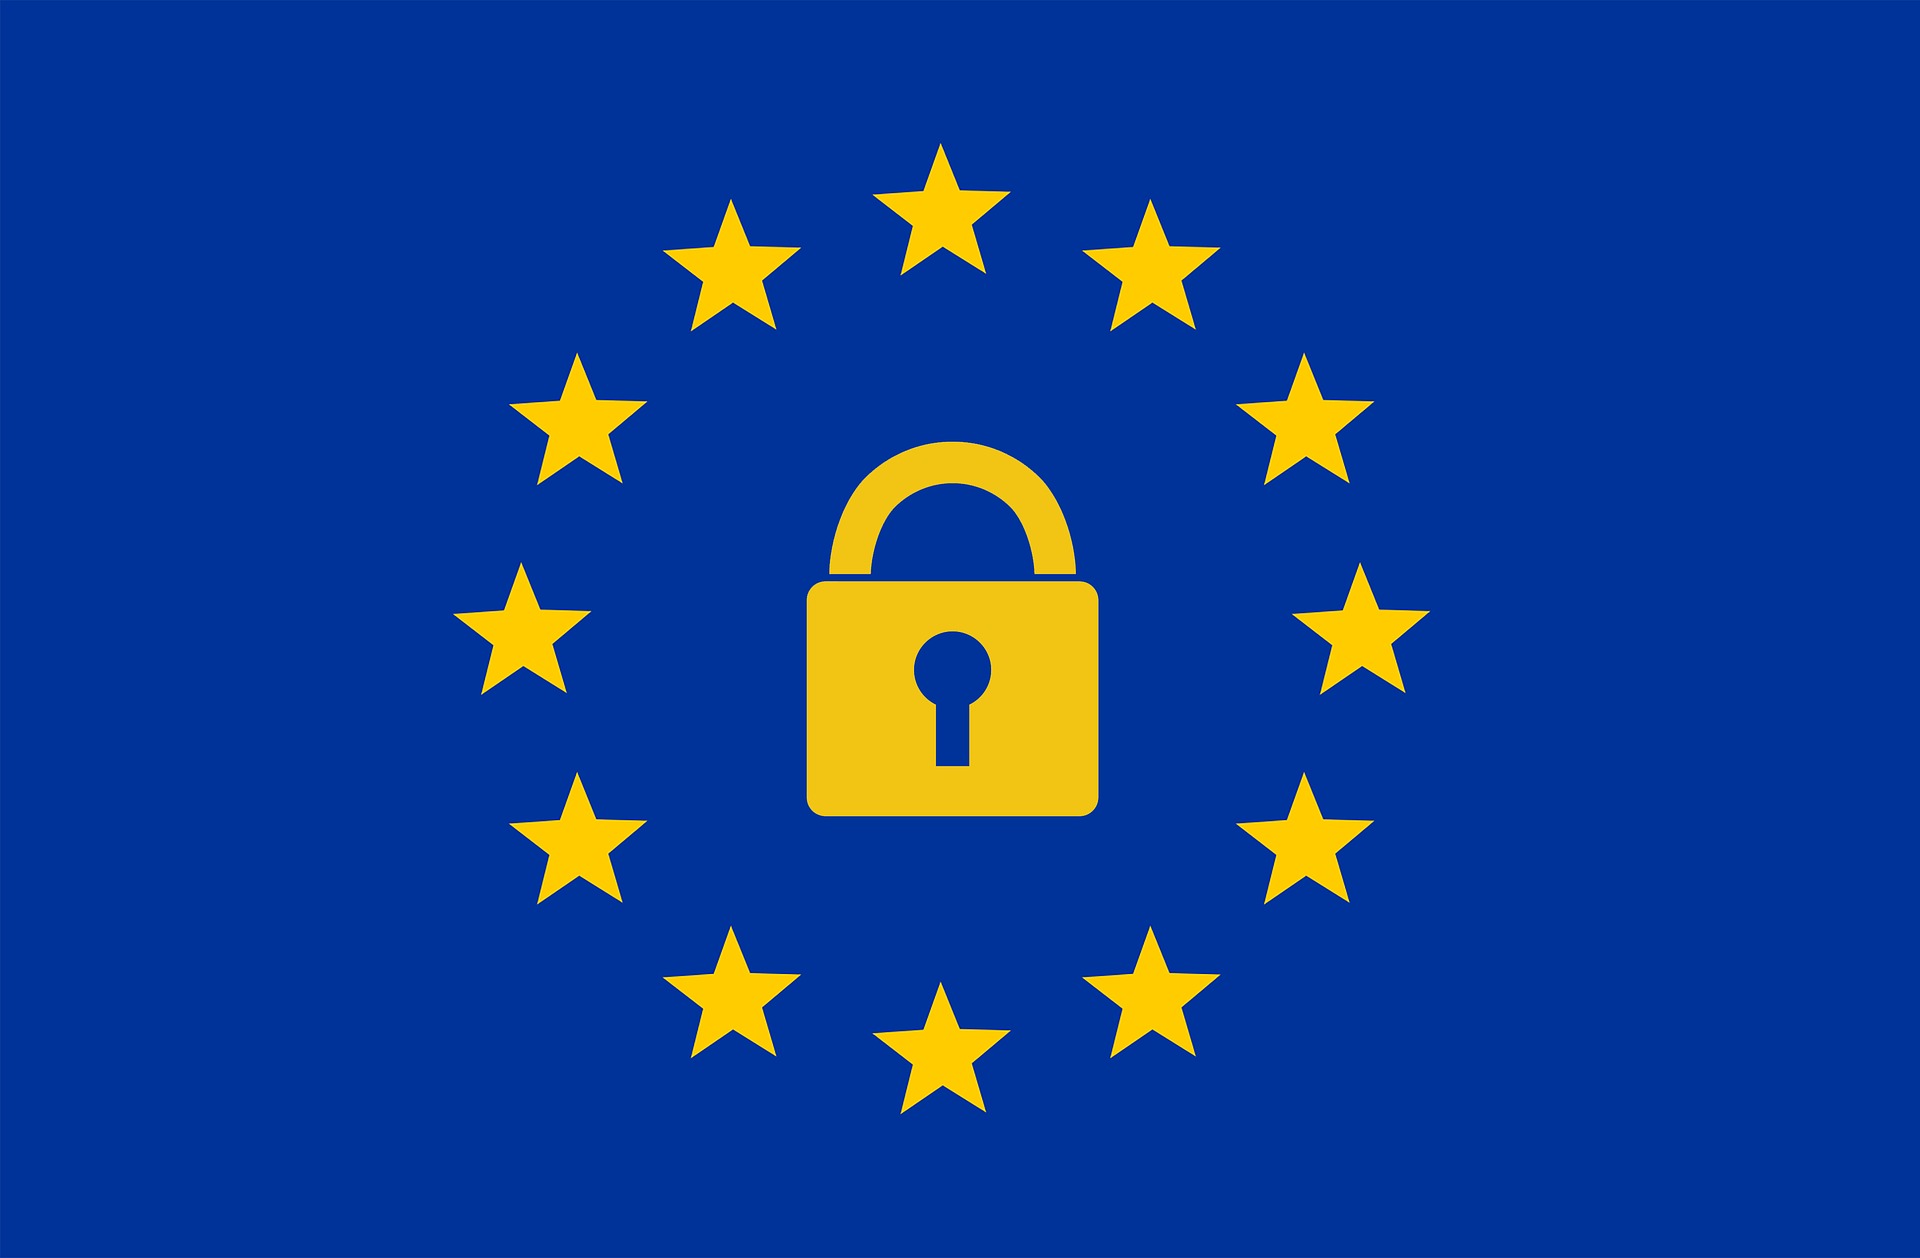 A compliance method – GDPR: new culture in the personal data protection